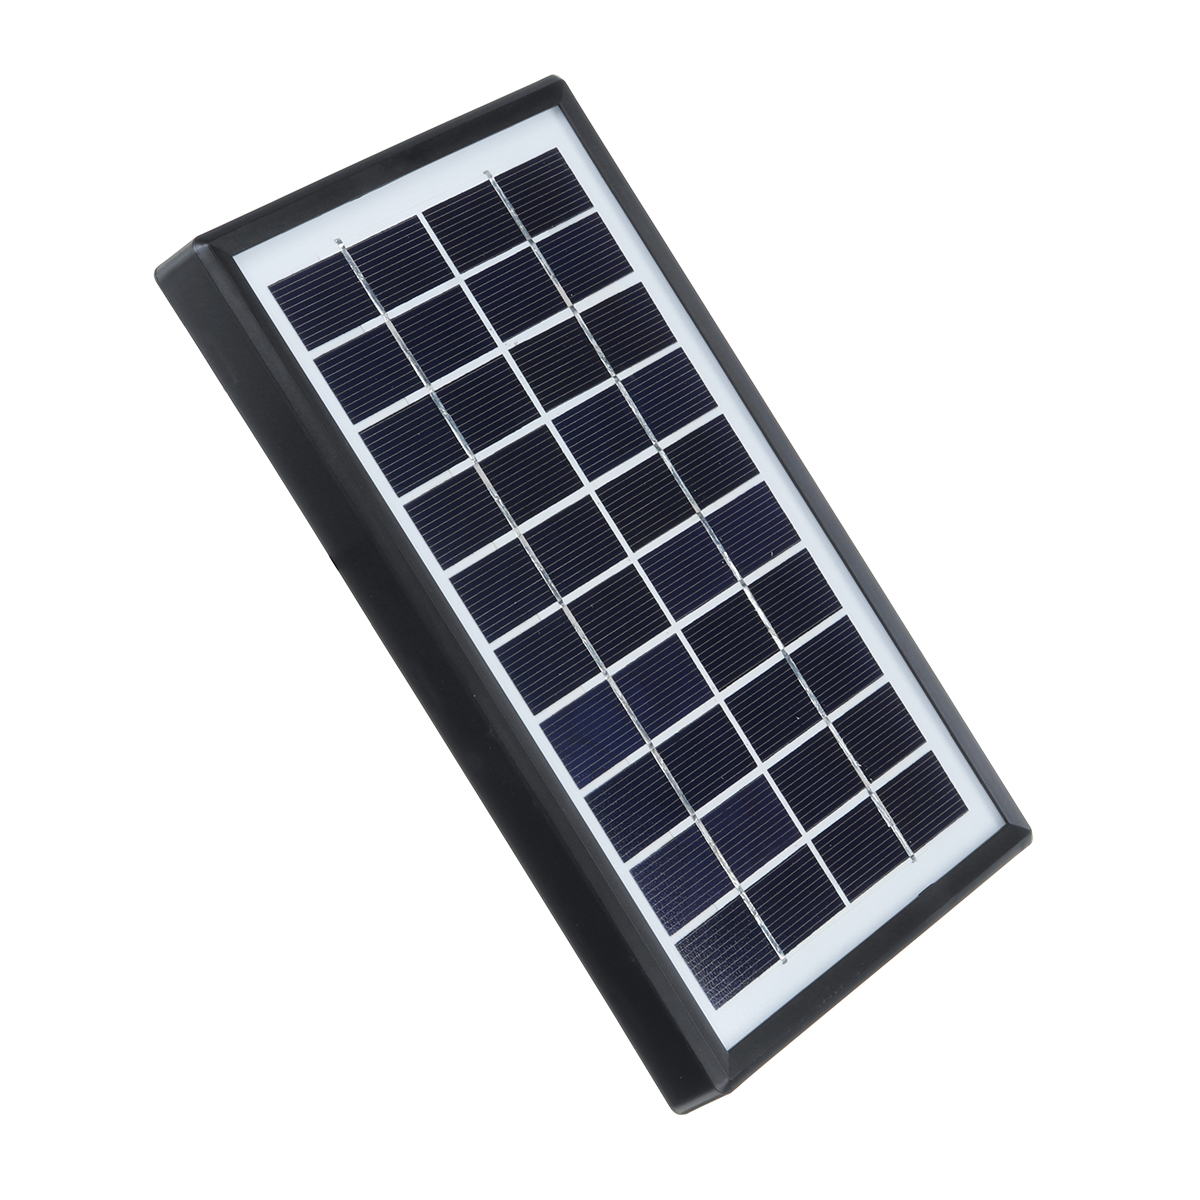 4W-10V-380LH-Solar-Panel-Water-Pump-Landscape-Pond-Pool-Aquarium-Floating-Fountain-with-6-Nozzles-1543610-8